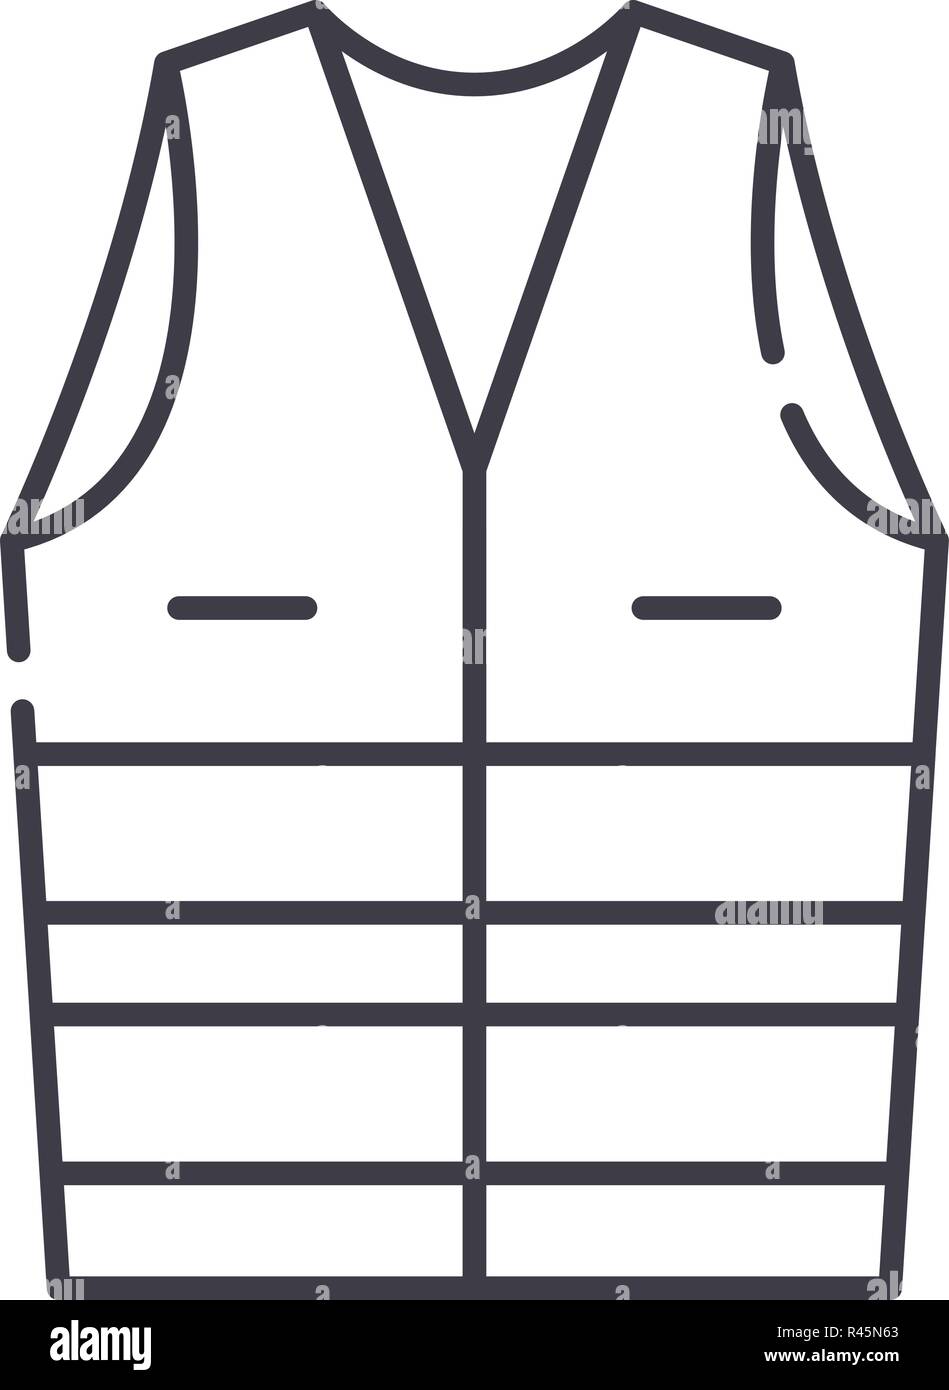 Work clothes line icon concept. Work clothes vector linear illustration ...